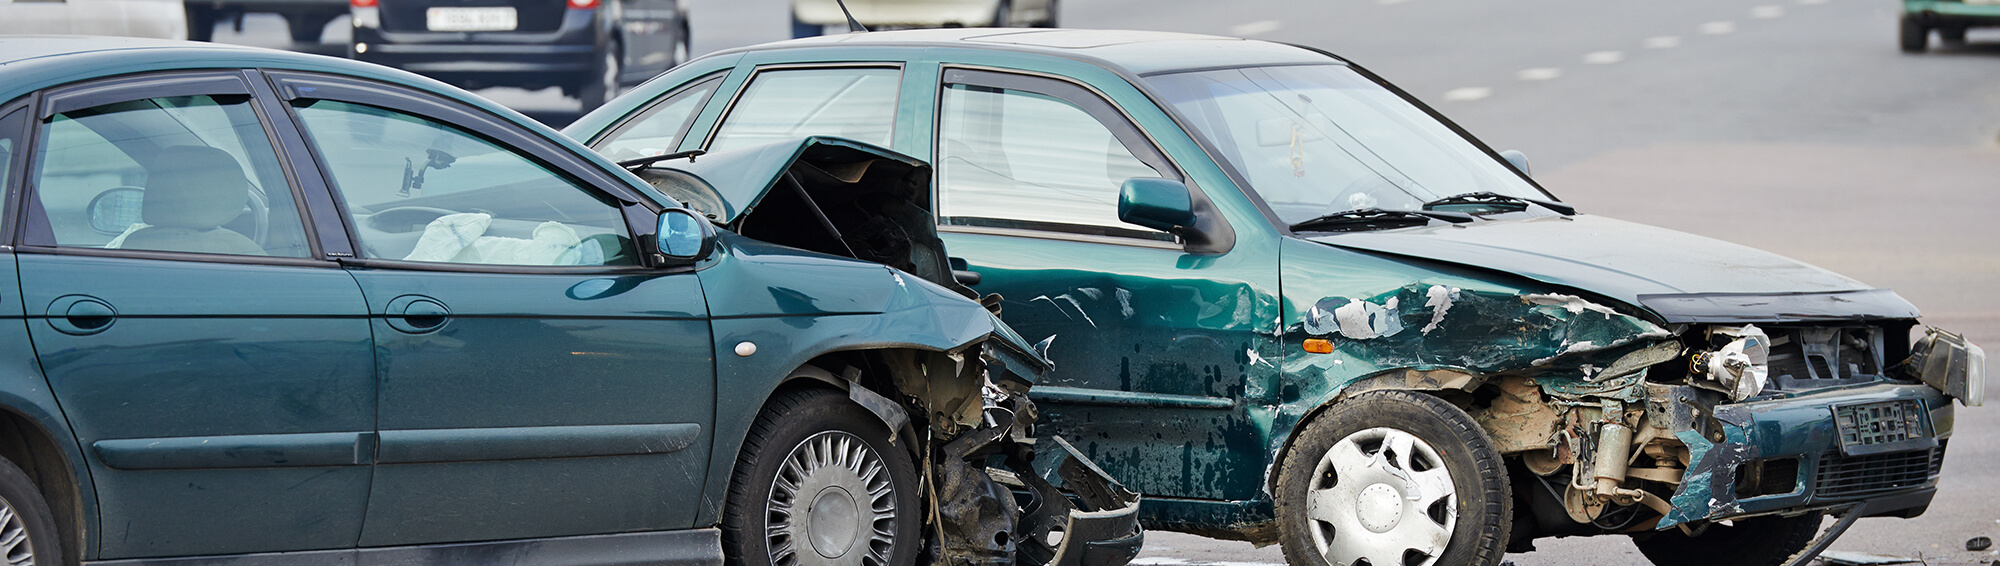 Why Should You See a Doctor after an Auto Accident?